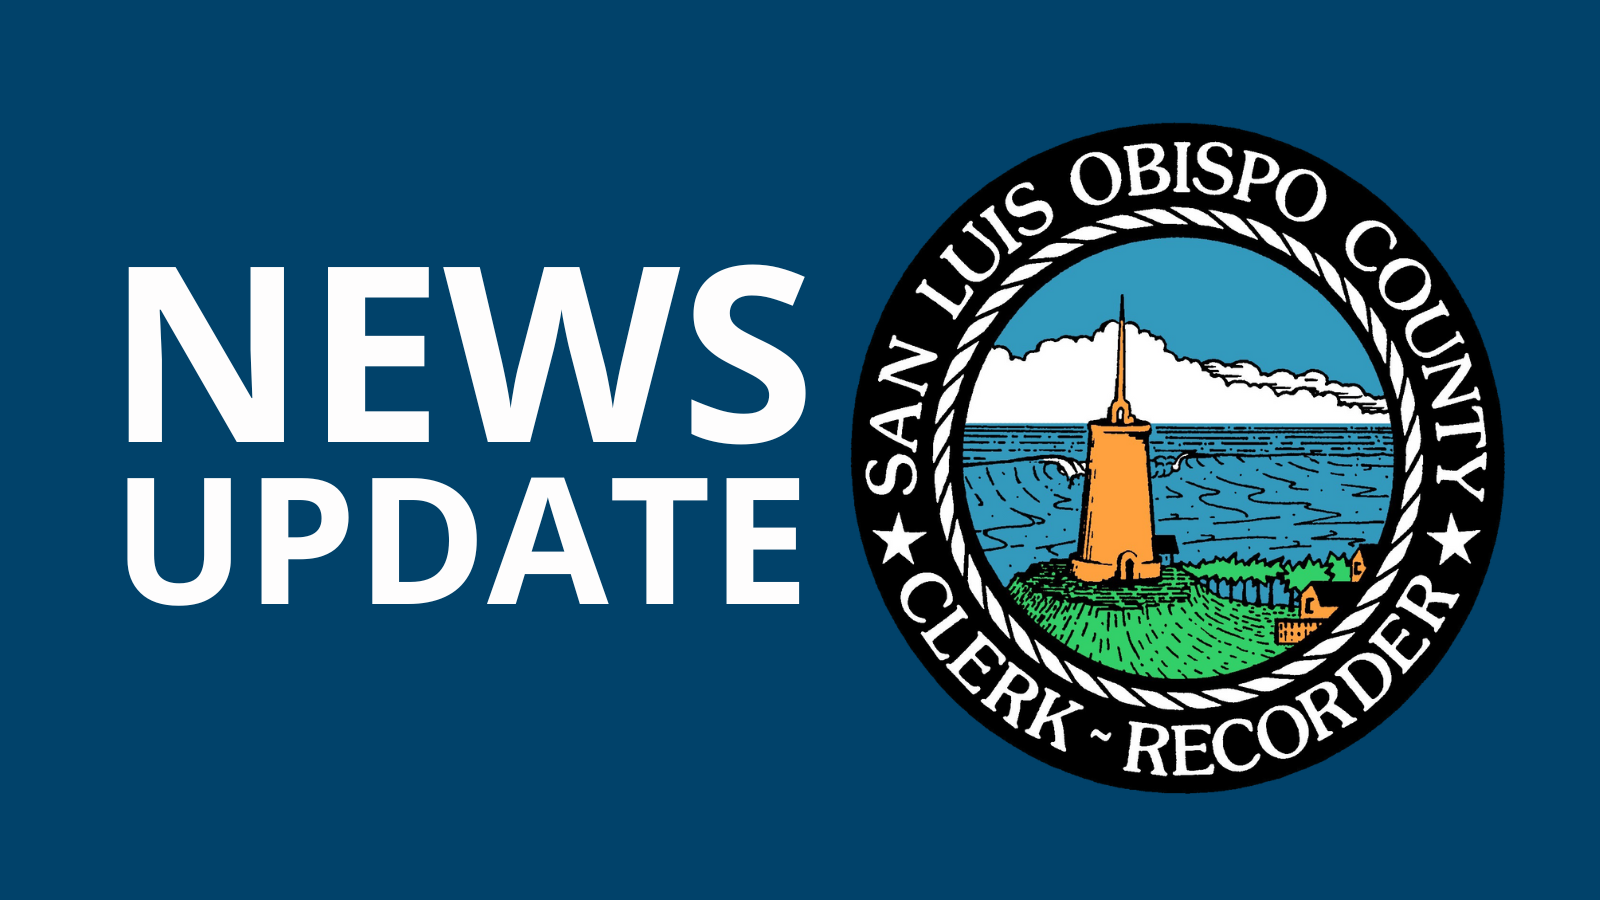 Text that says News Update next to the official Clerk-Recorder seal